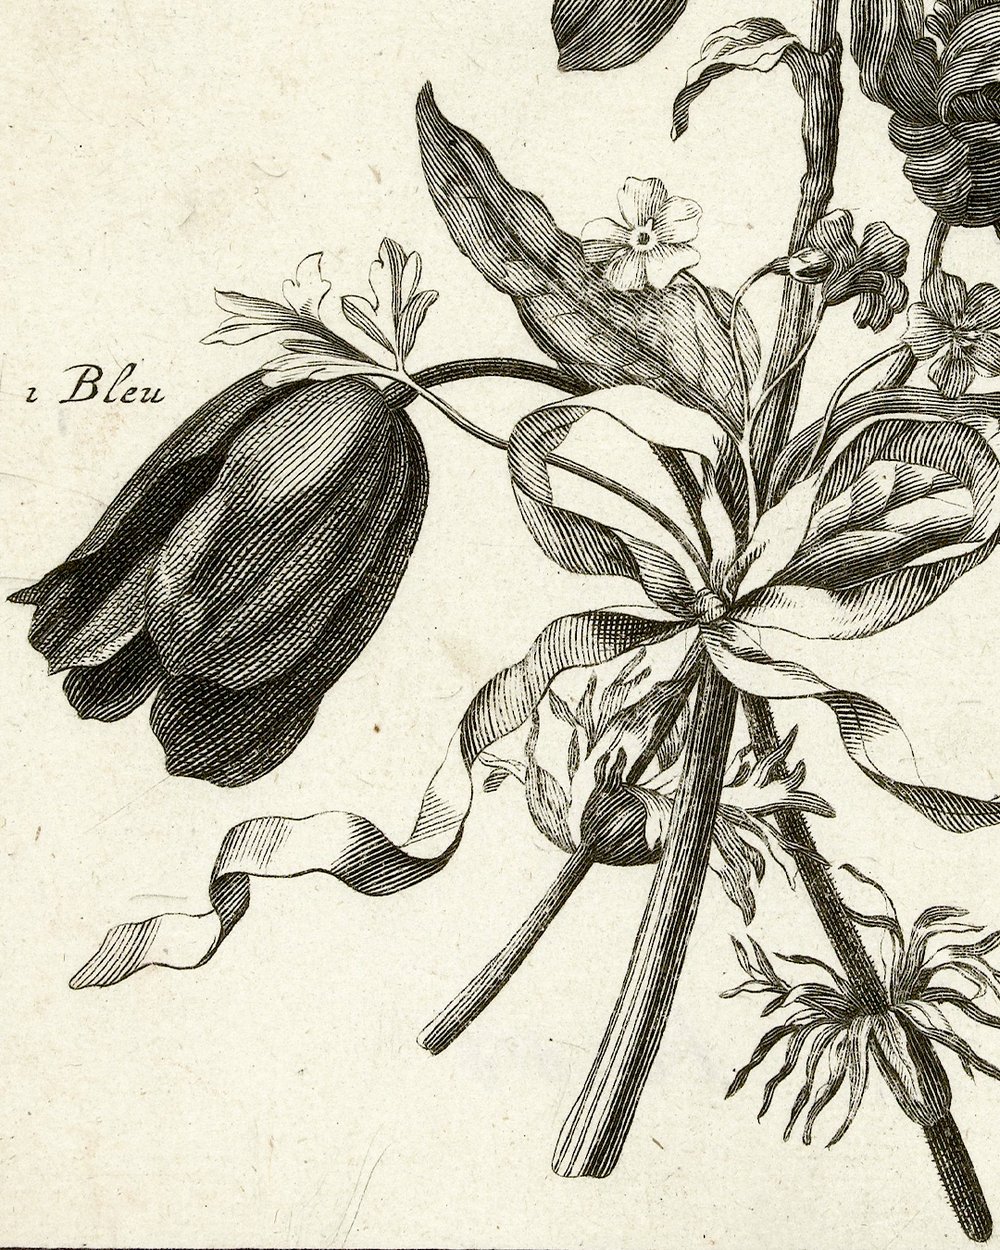 "Four flowers, including an anemone" (1700 - 1800)